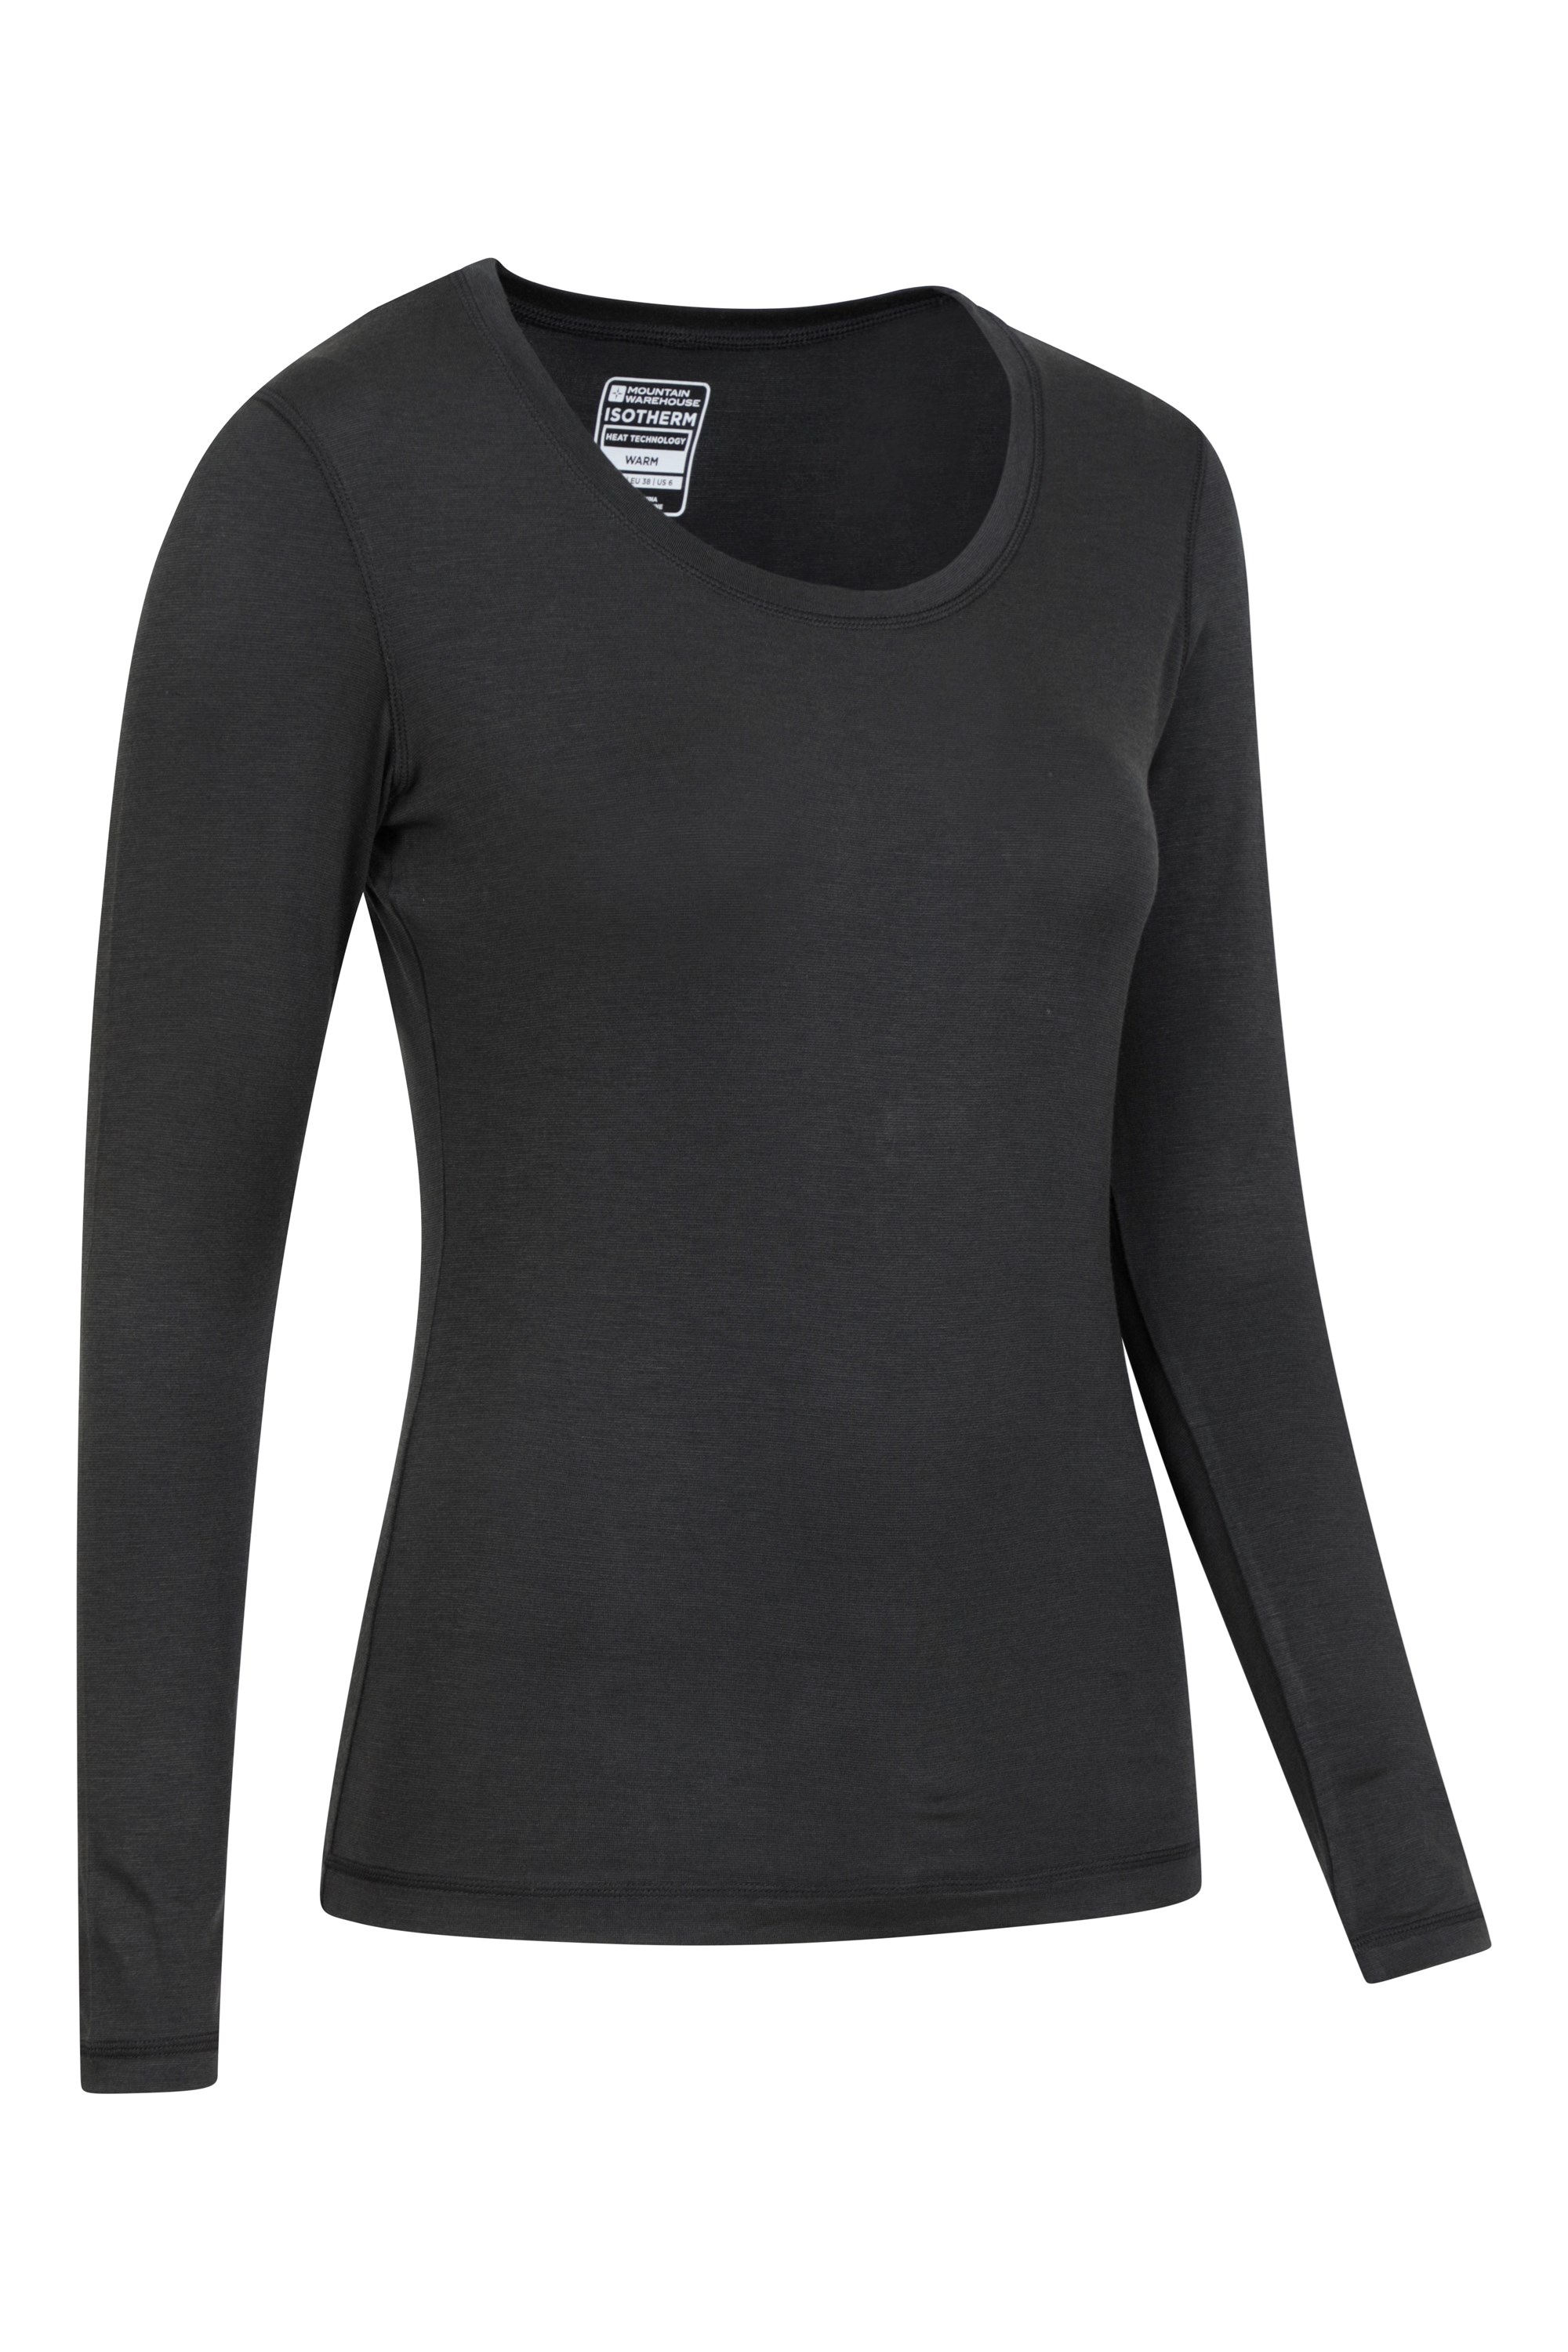 Subuteay Thermal Tops for Women Soft Long Sleeve Shirt Black XX-Large,  Black, XX-Large : : Clothing, Shoes & Accessories